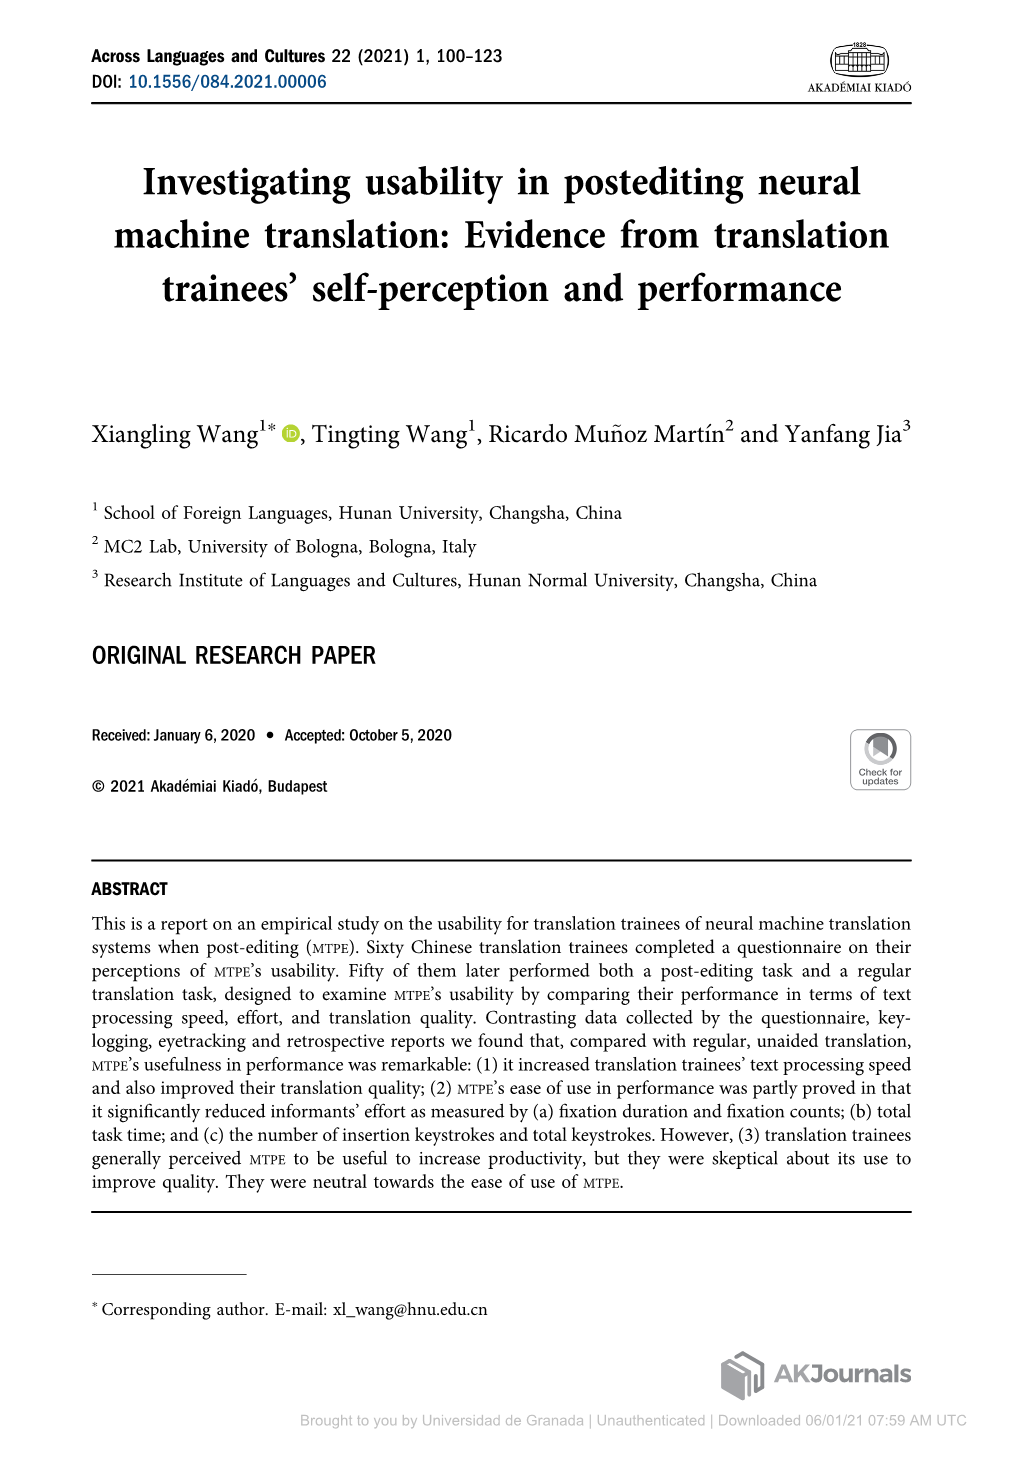 Investigating Usability in Postediting Neural Machine Translation: Evidence from Translation Trainees' Self-Perception And